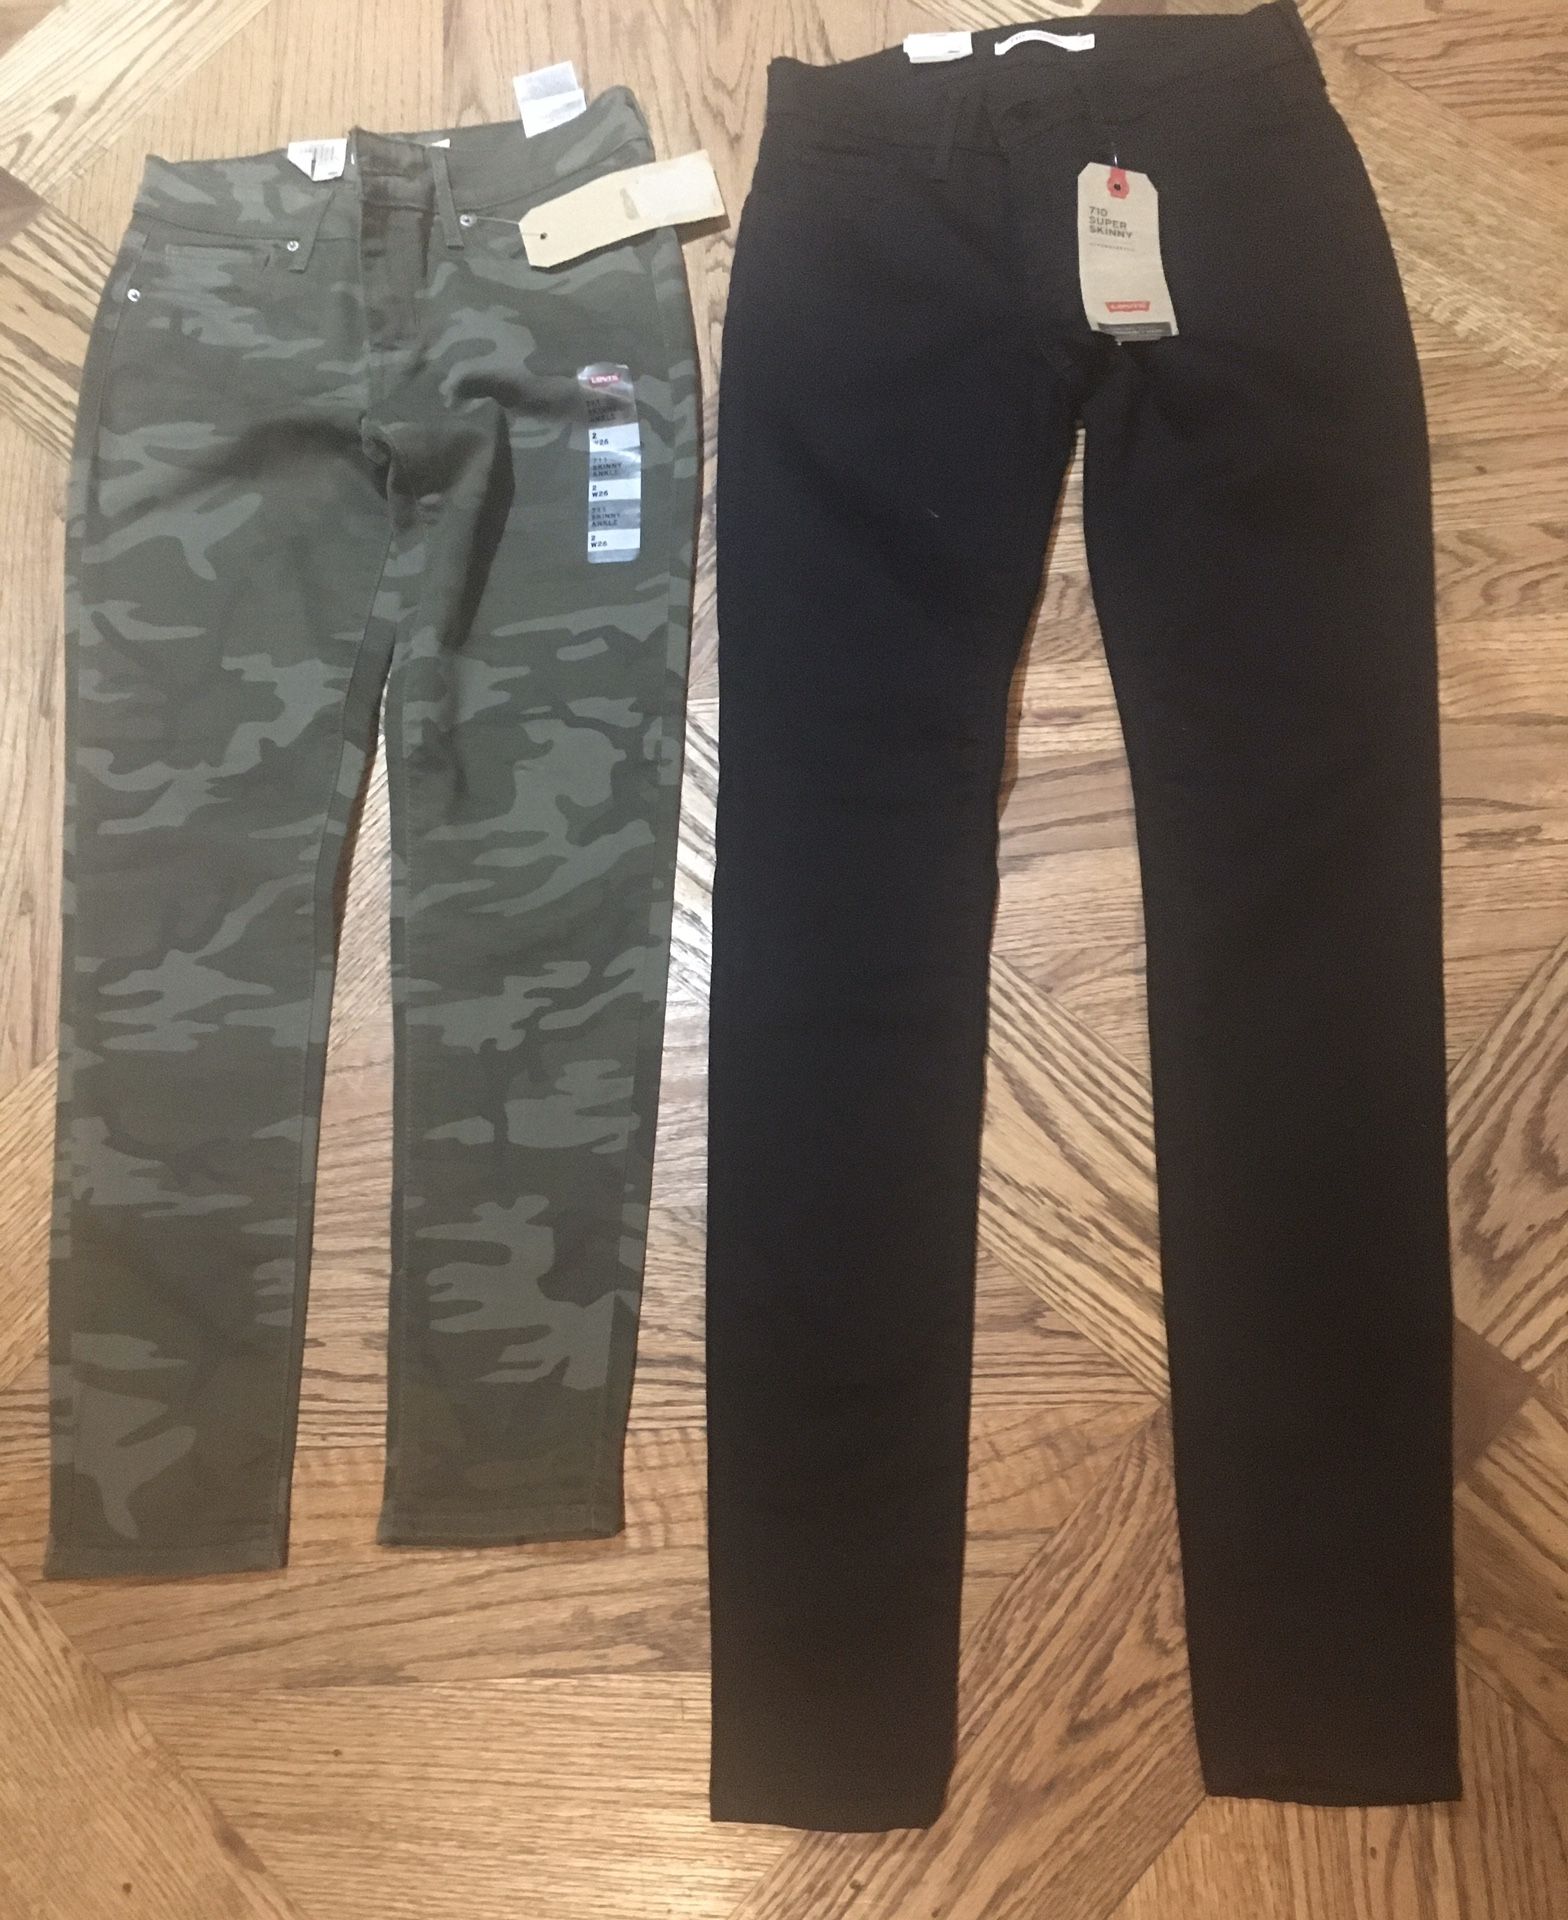 Levis Size 27 Black And 26 Green New $20 Each 